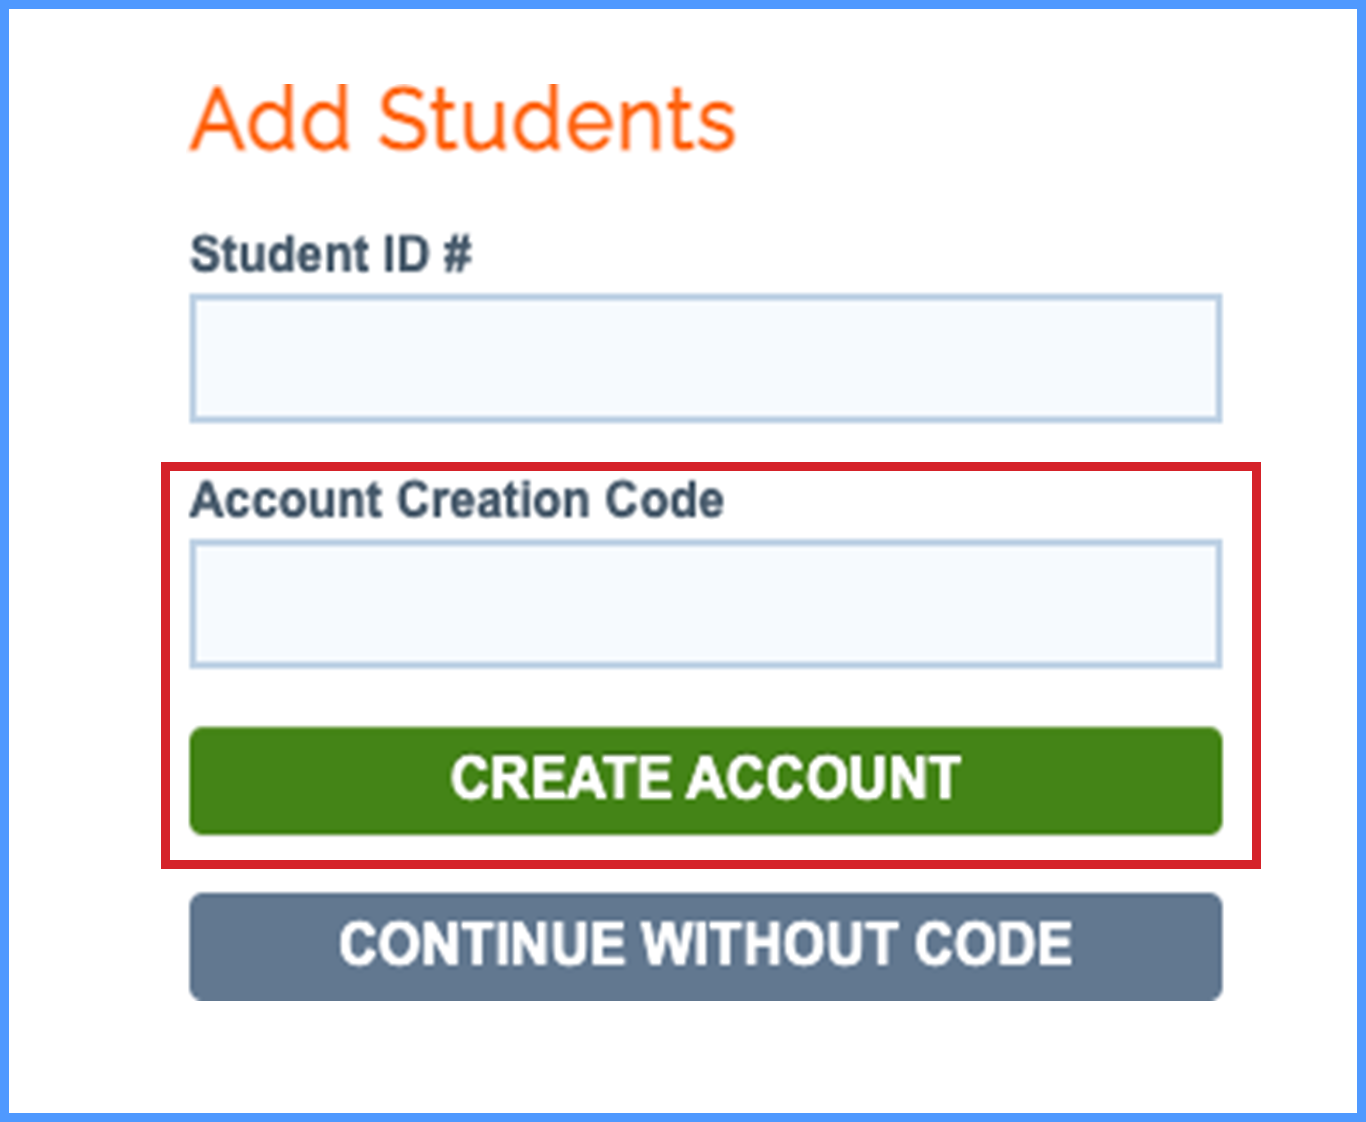 Add Students page with “Account Creation Code” squared in red